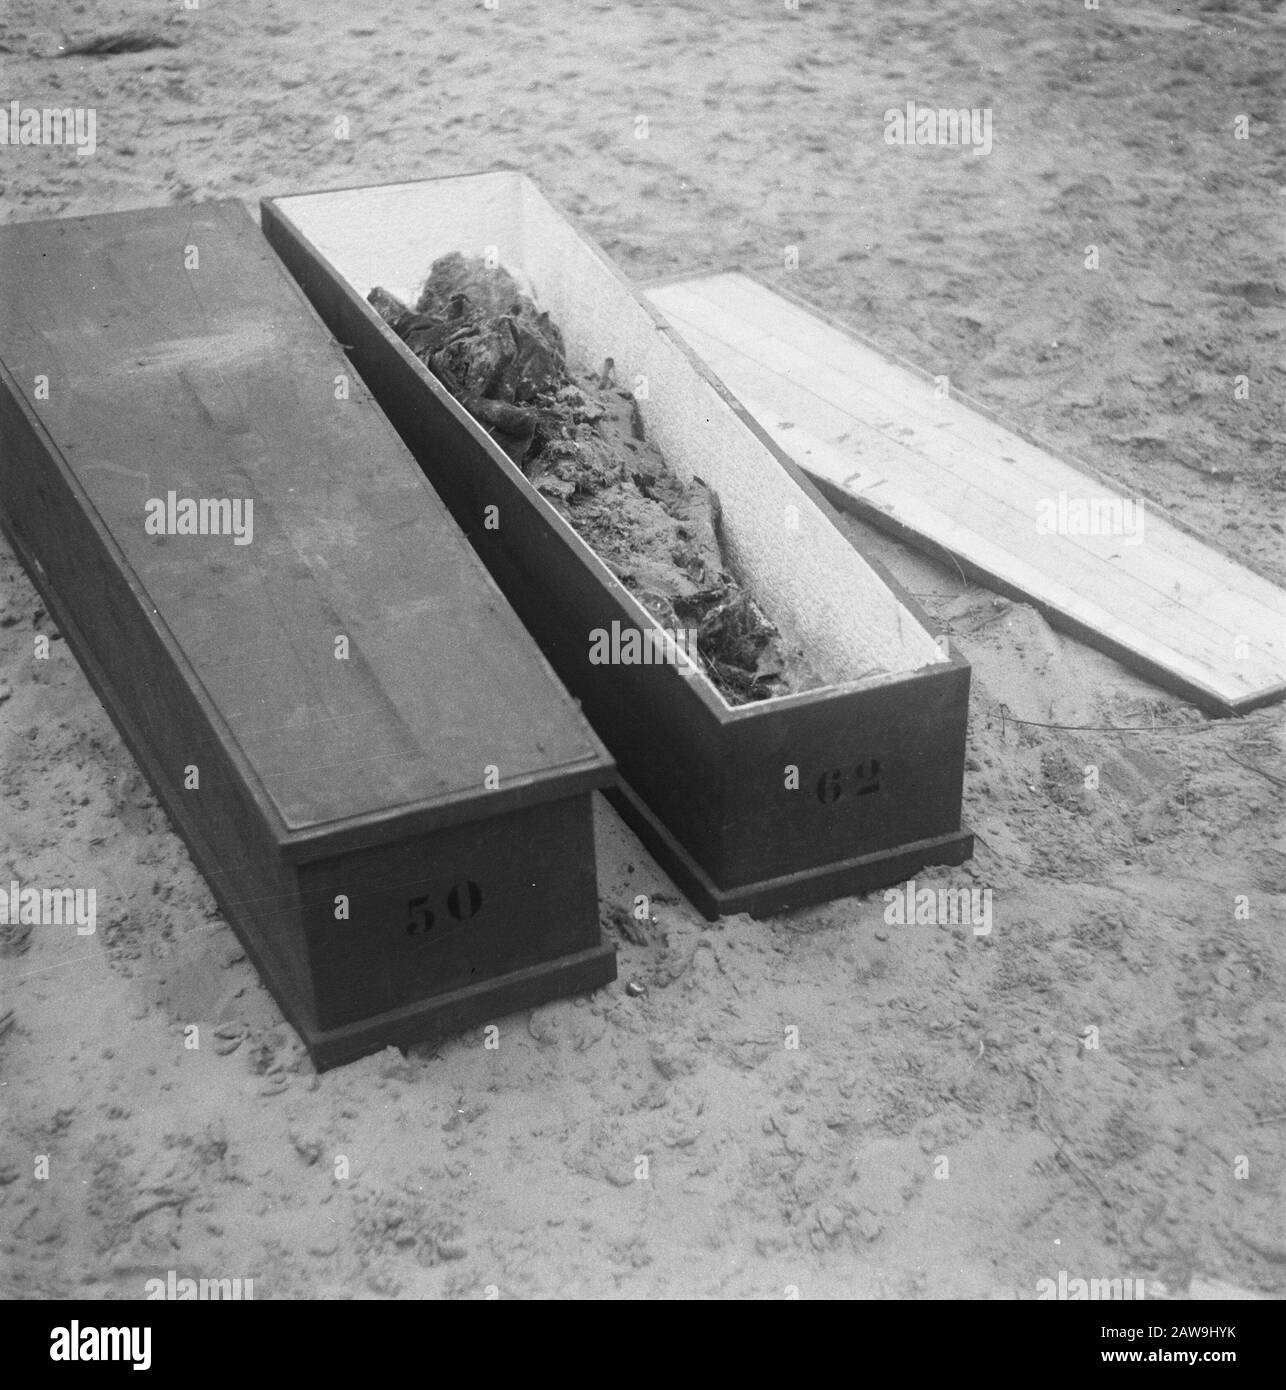 Mass Grave to Waalsdorp  Mass Grave to Waalsdorp. Corpse in a coffin Date: August 1945 Location: The Hague, South Holland Keywords: corpses, mass graves, ruins, World War II Stock Photo